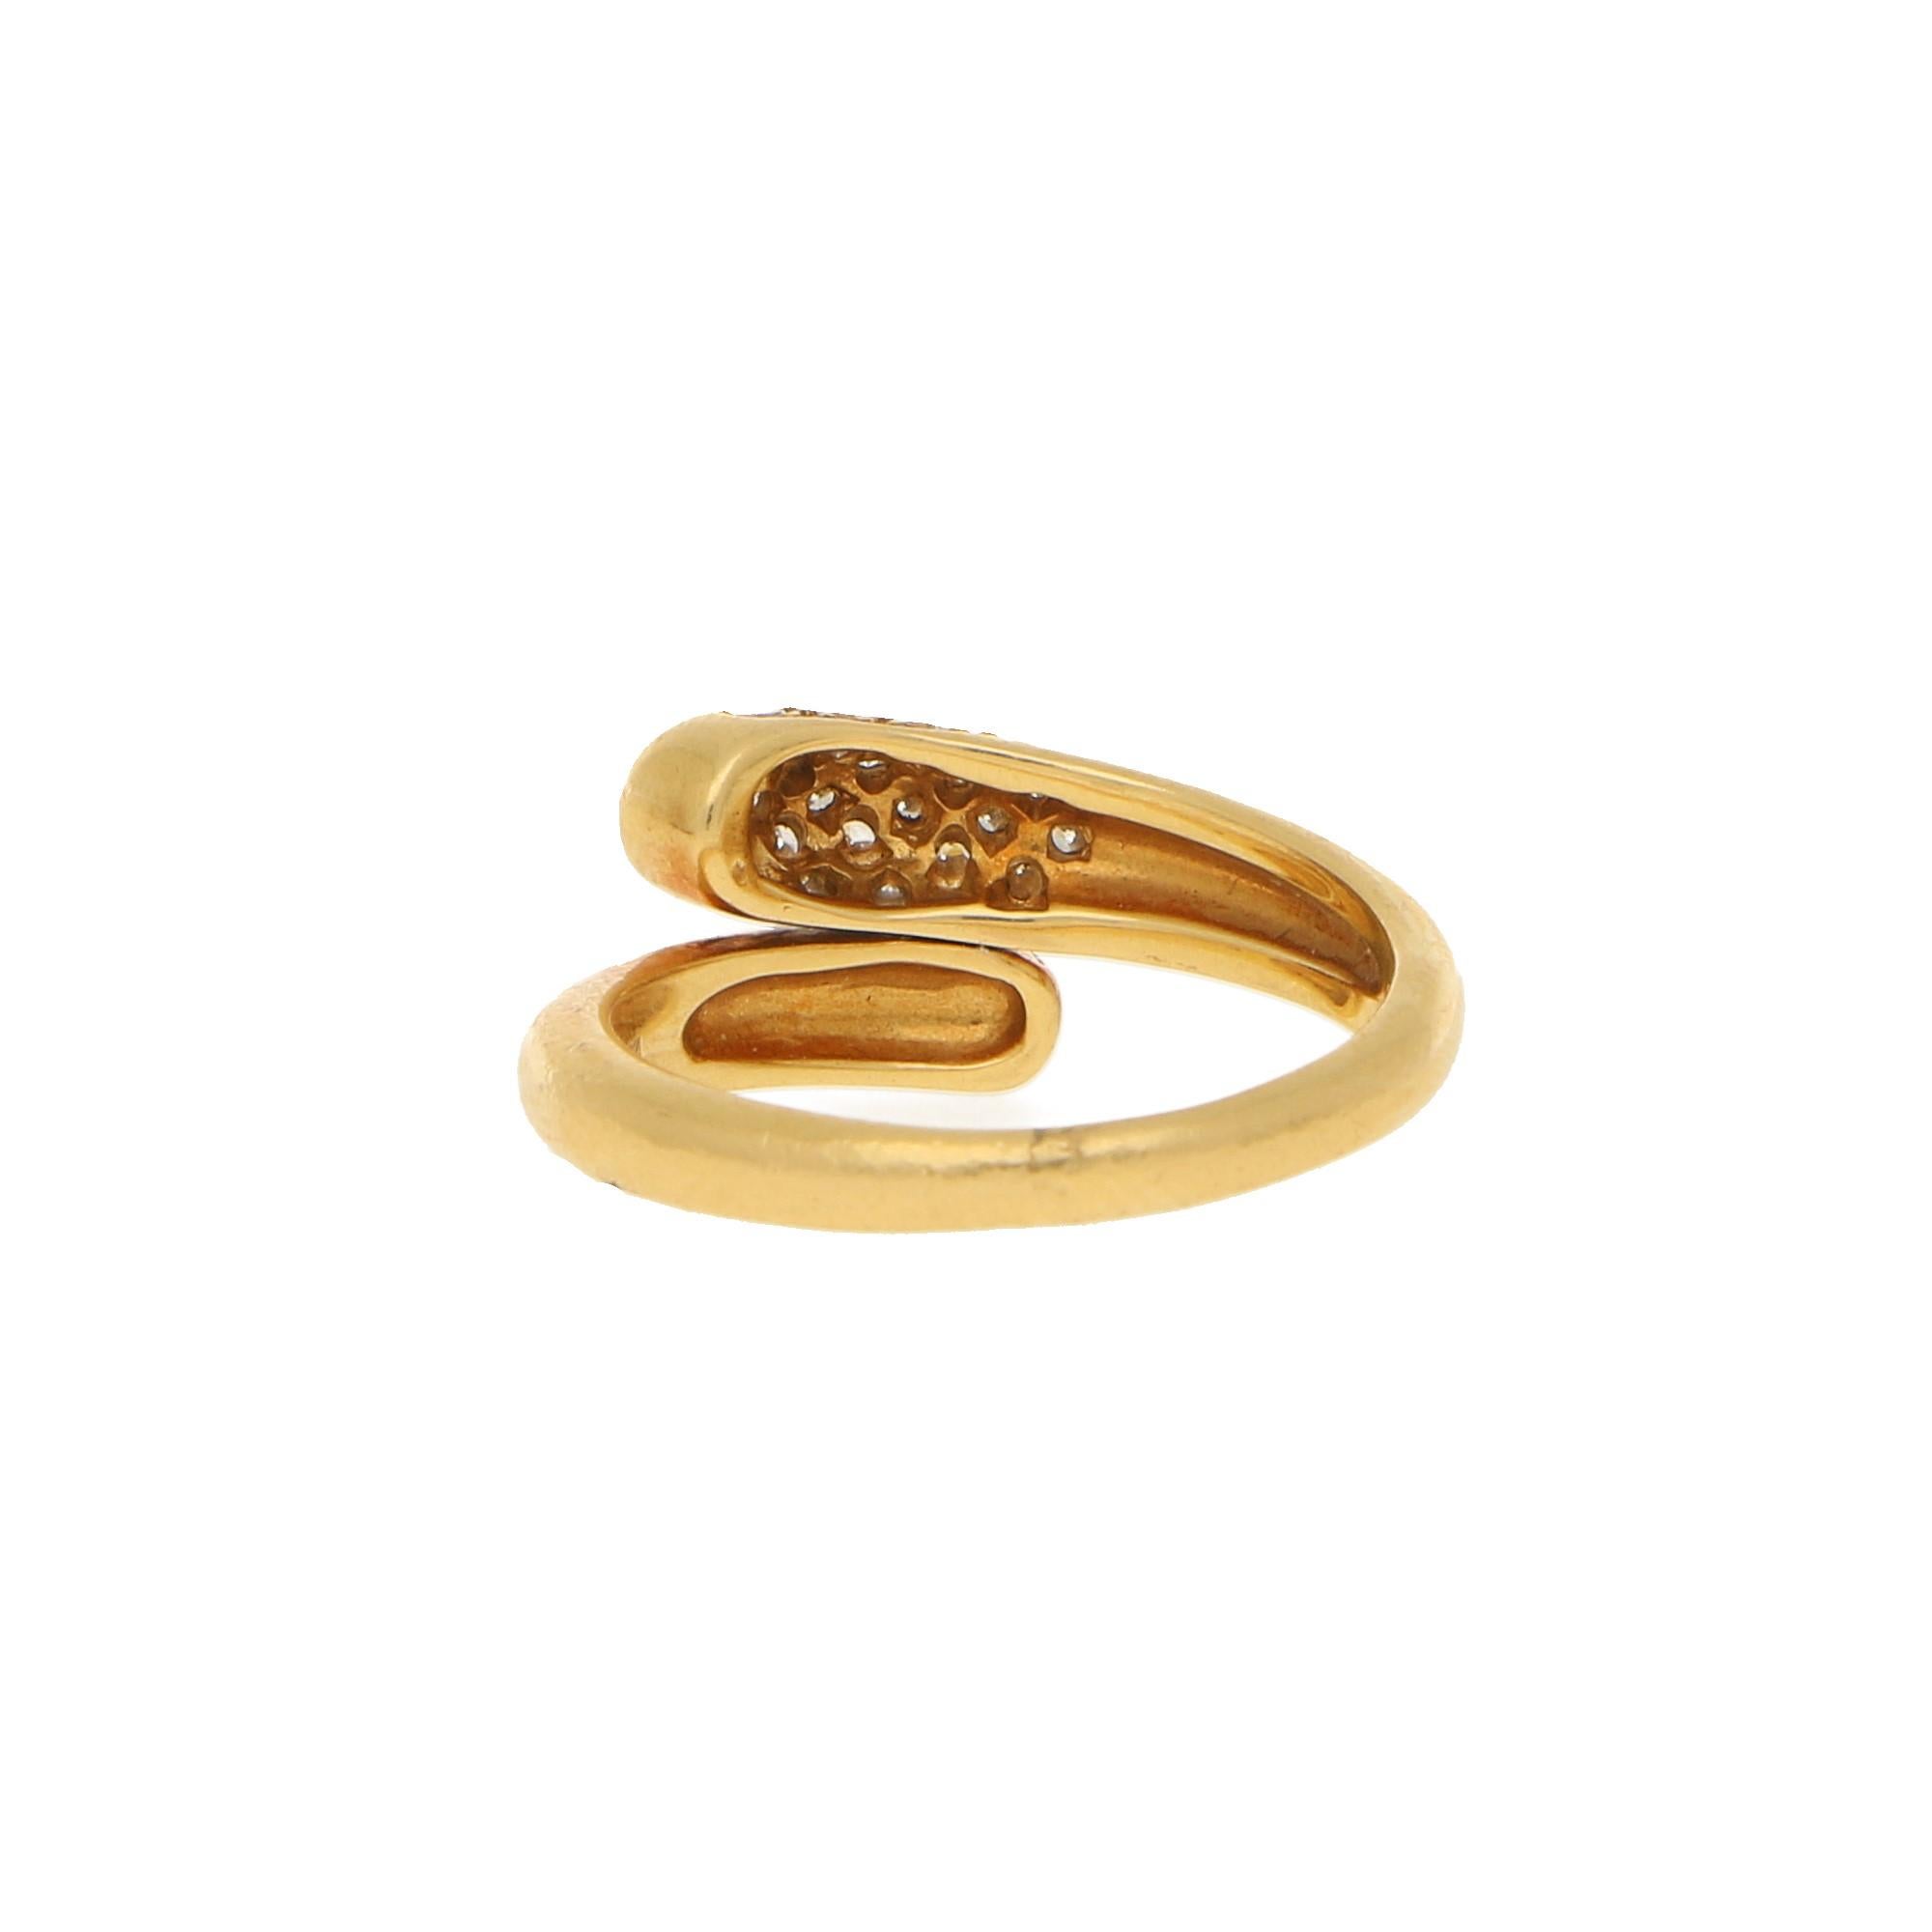 A vintage Bvlgari Serpenti ring in a crossover design set in 18k yellow gold. Within the crossover design one terminal is pave set with 19 round brilliant cut diamonds, totalling an approximate weight of 0.38ct, G/H colour and VS clarity. 

This